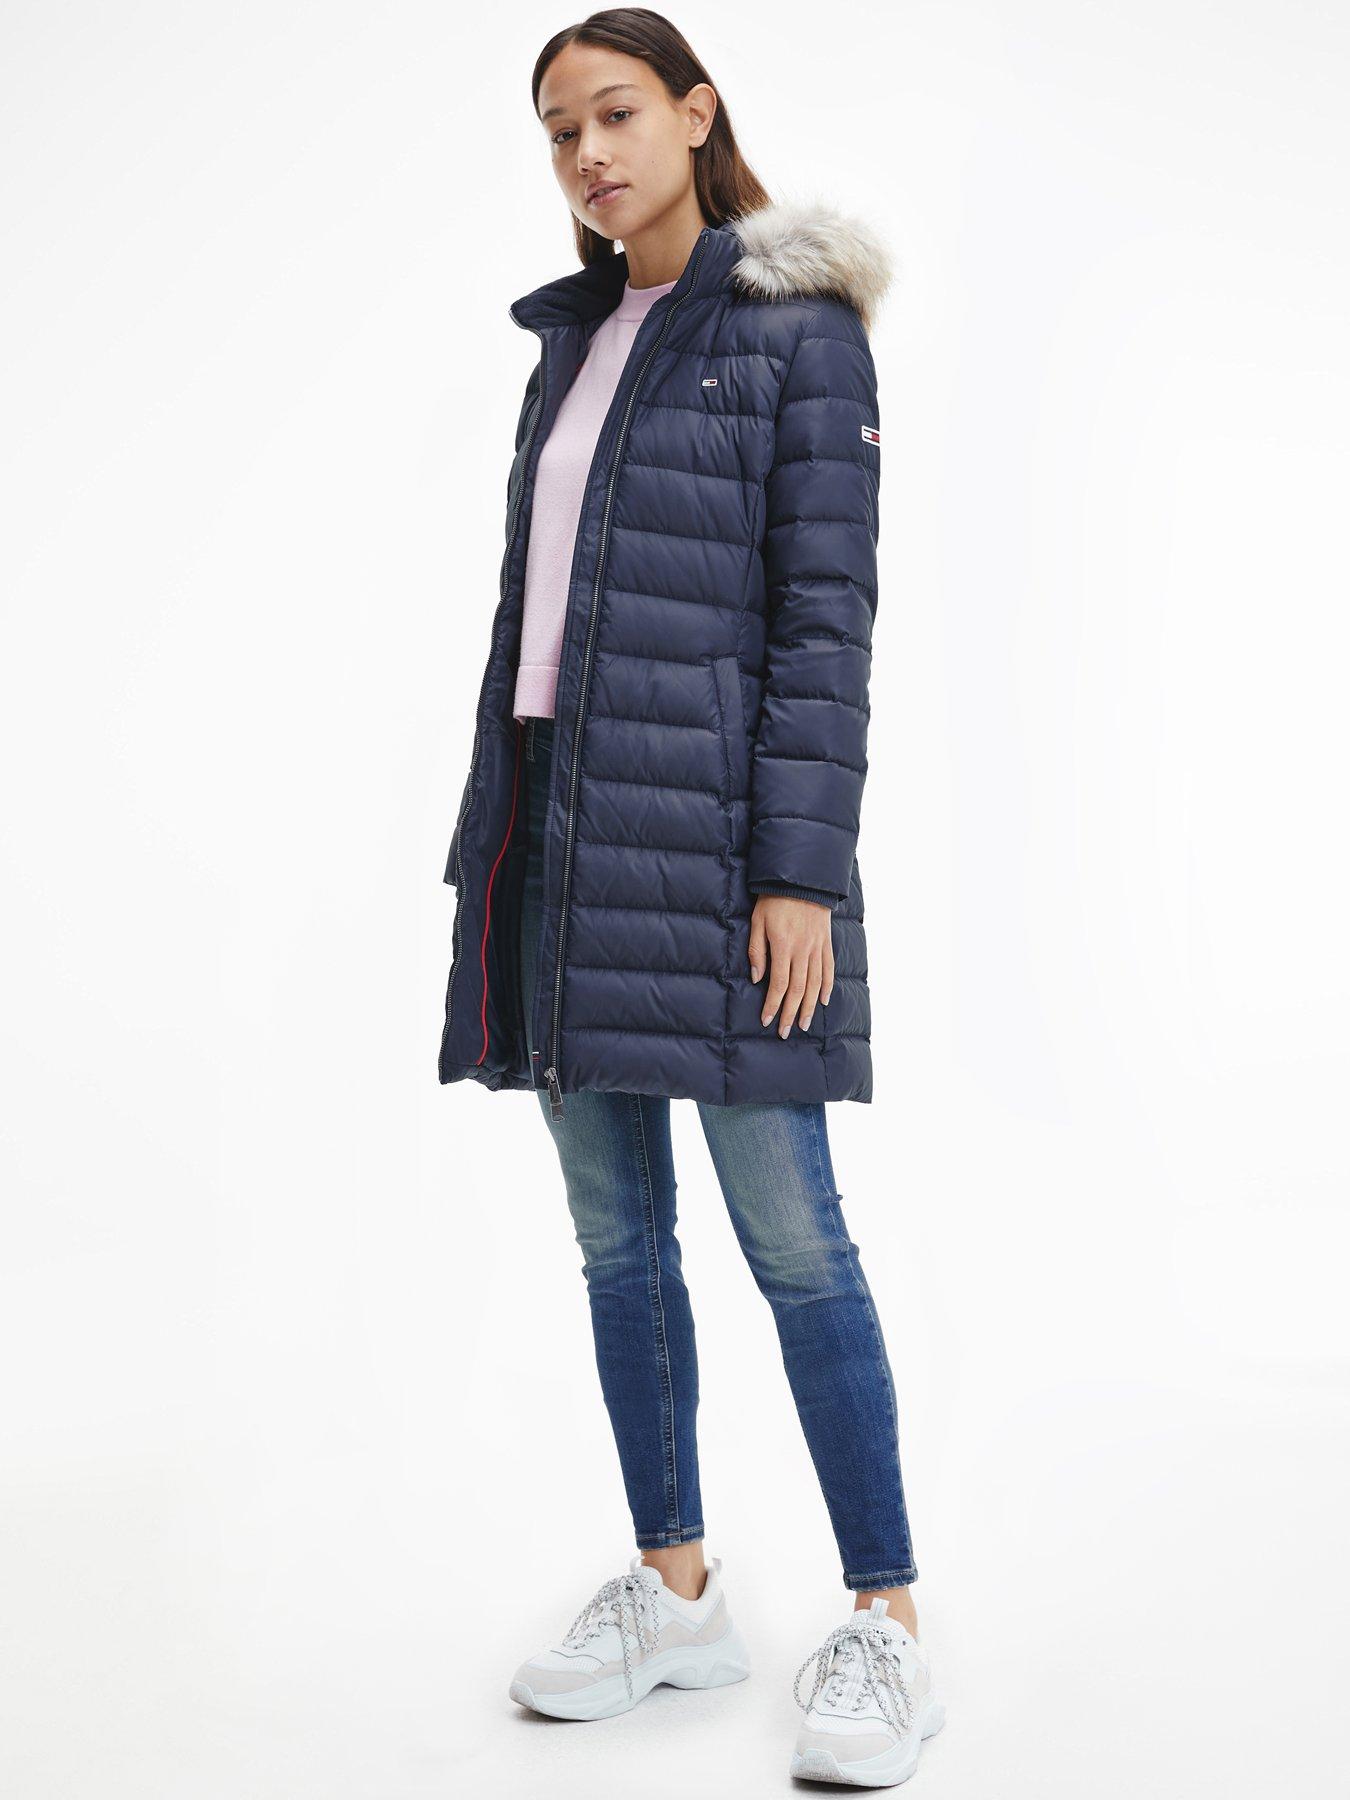 Quilted & Padded | Tommy hilfiger | & jackets Women |